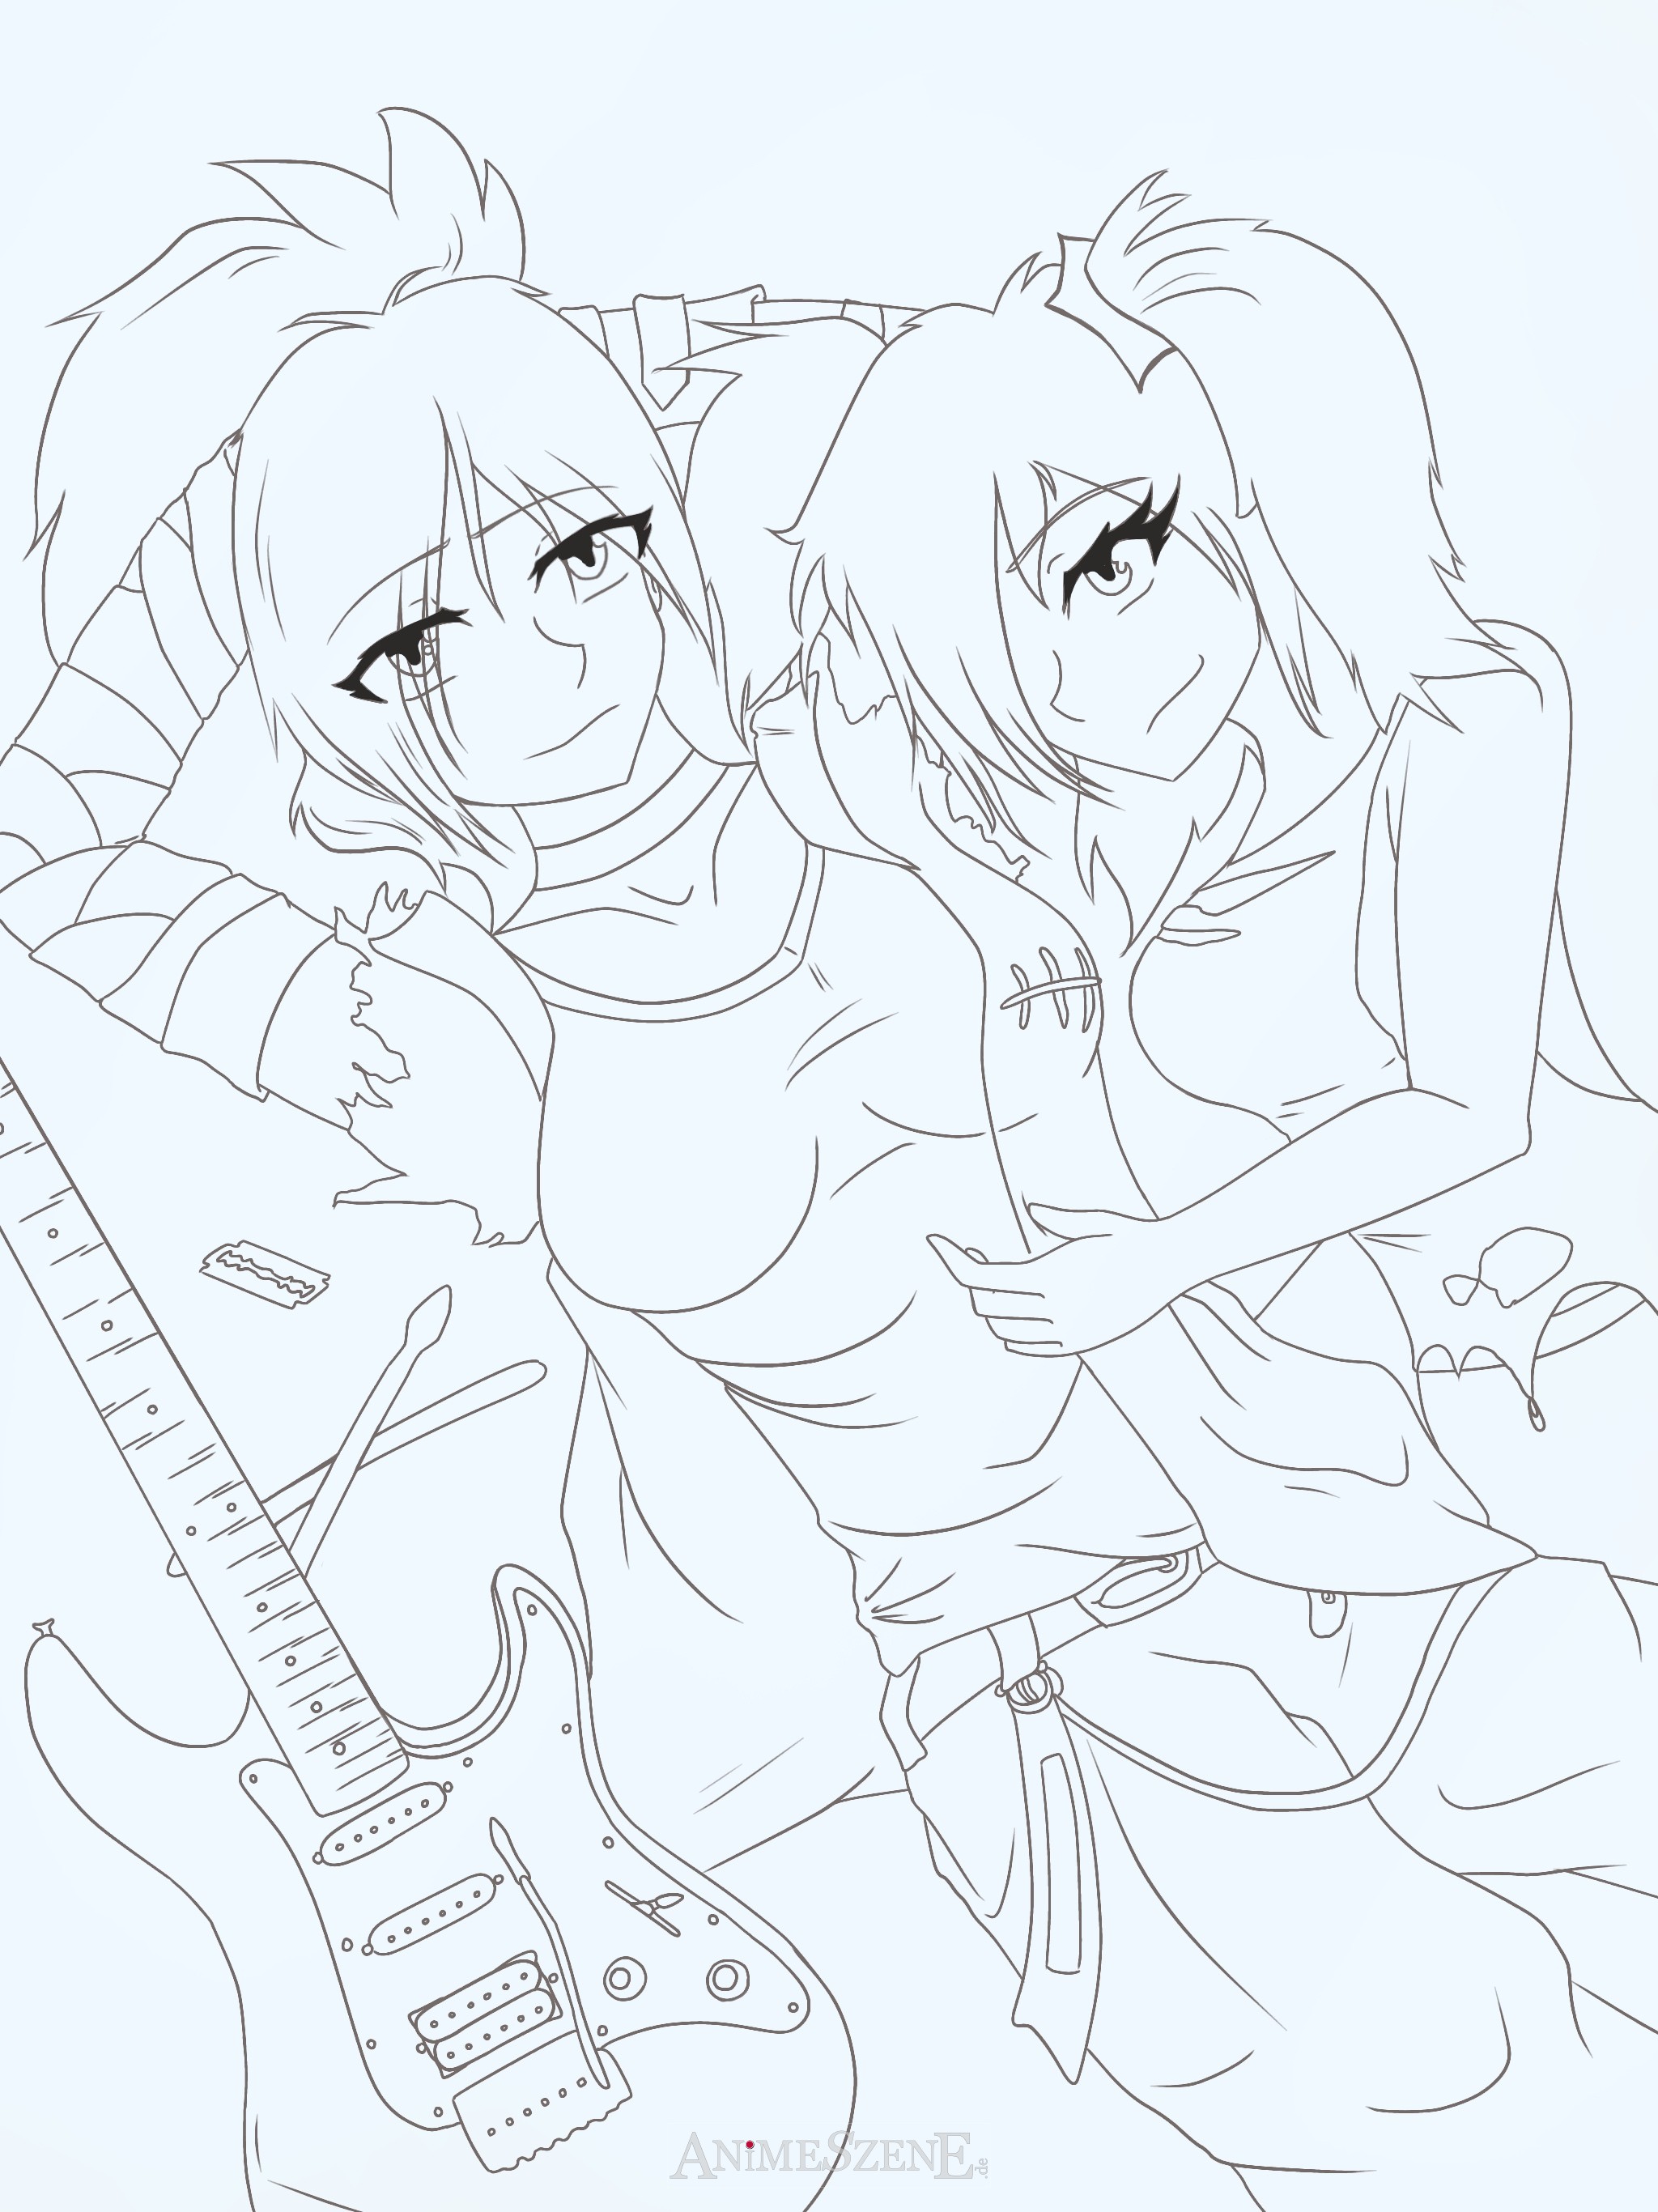 Diesseits - Cover Lineart Ver. 2